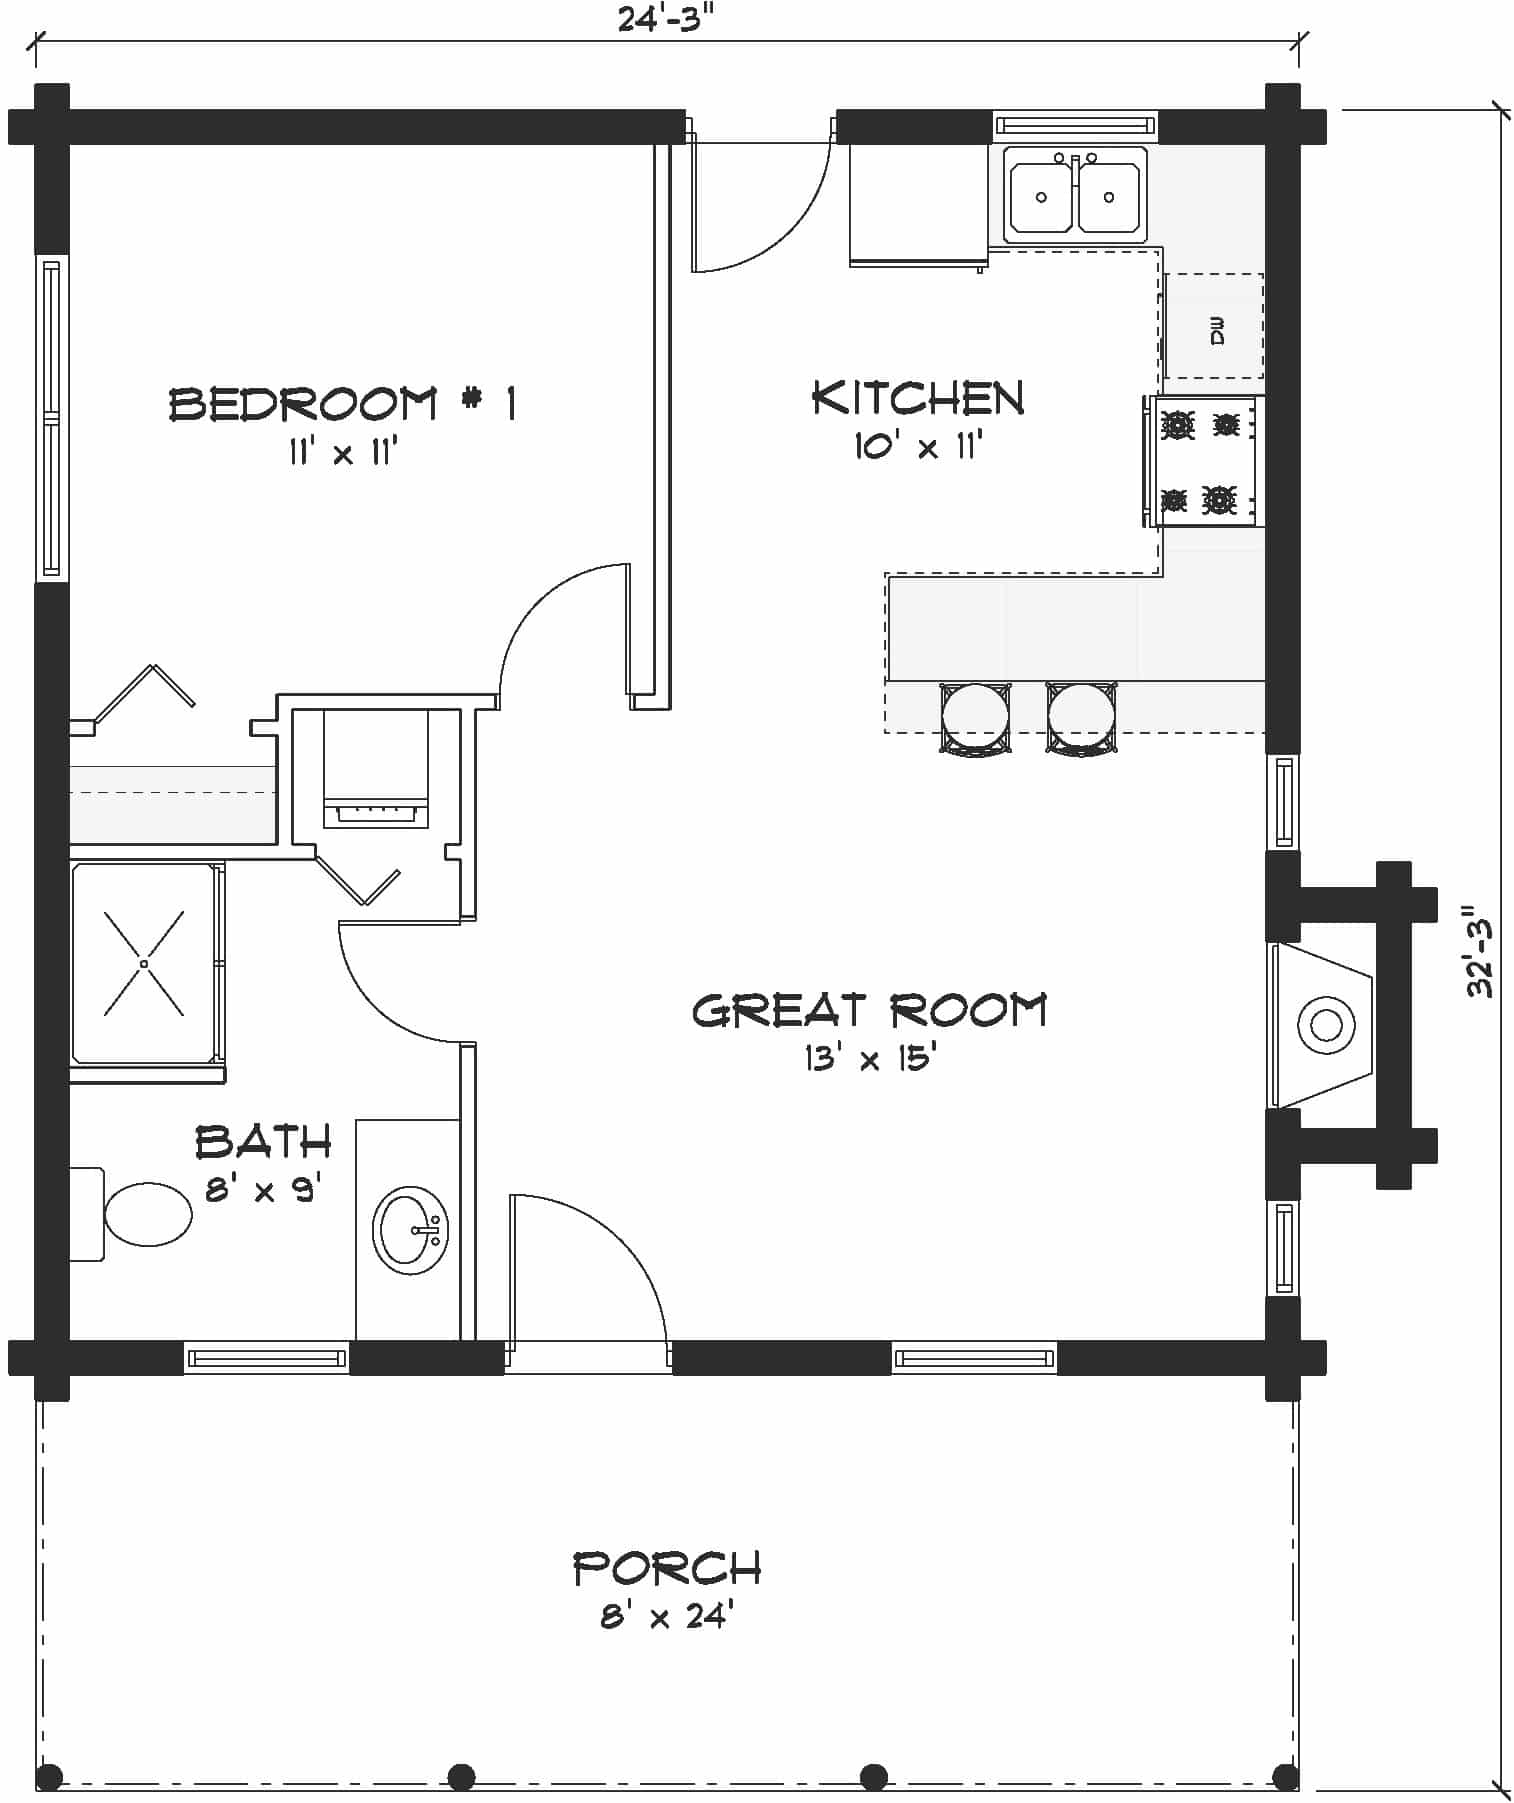 Beautiful Newly Designed 599 Sq Ft - 1 Level - Log Cabin Home Plan 1